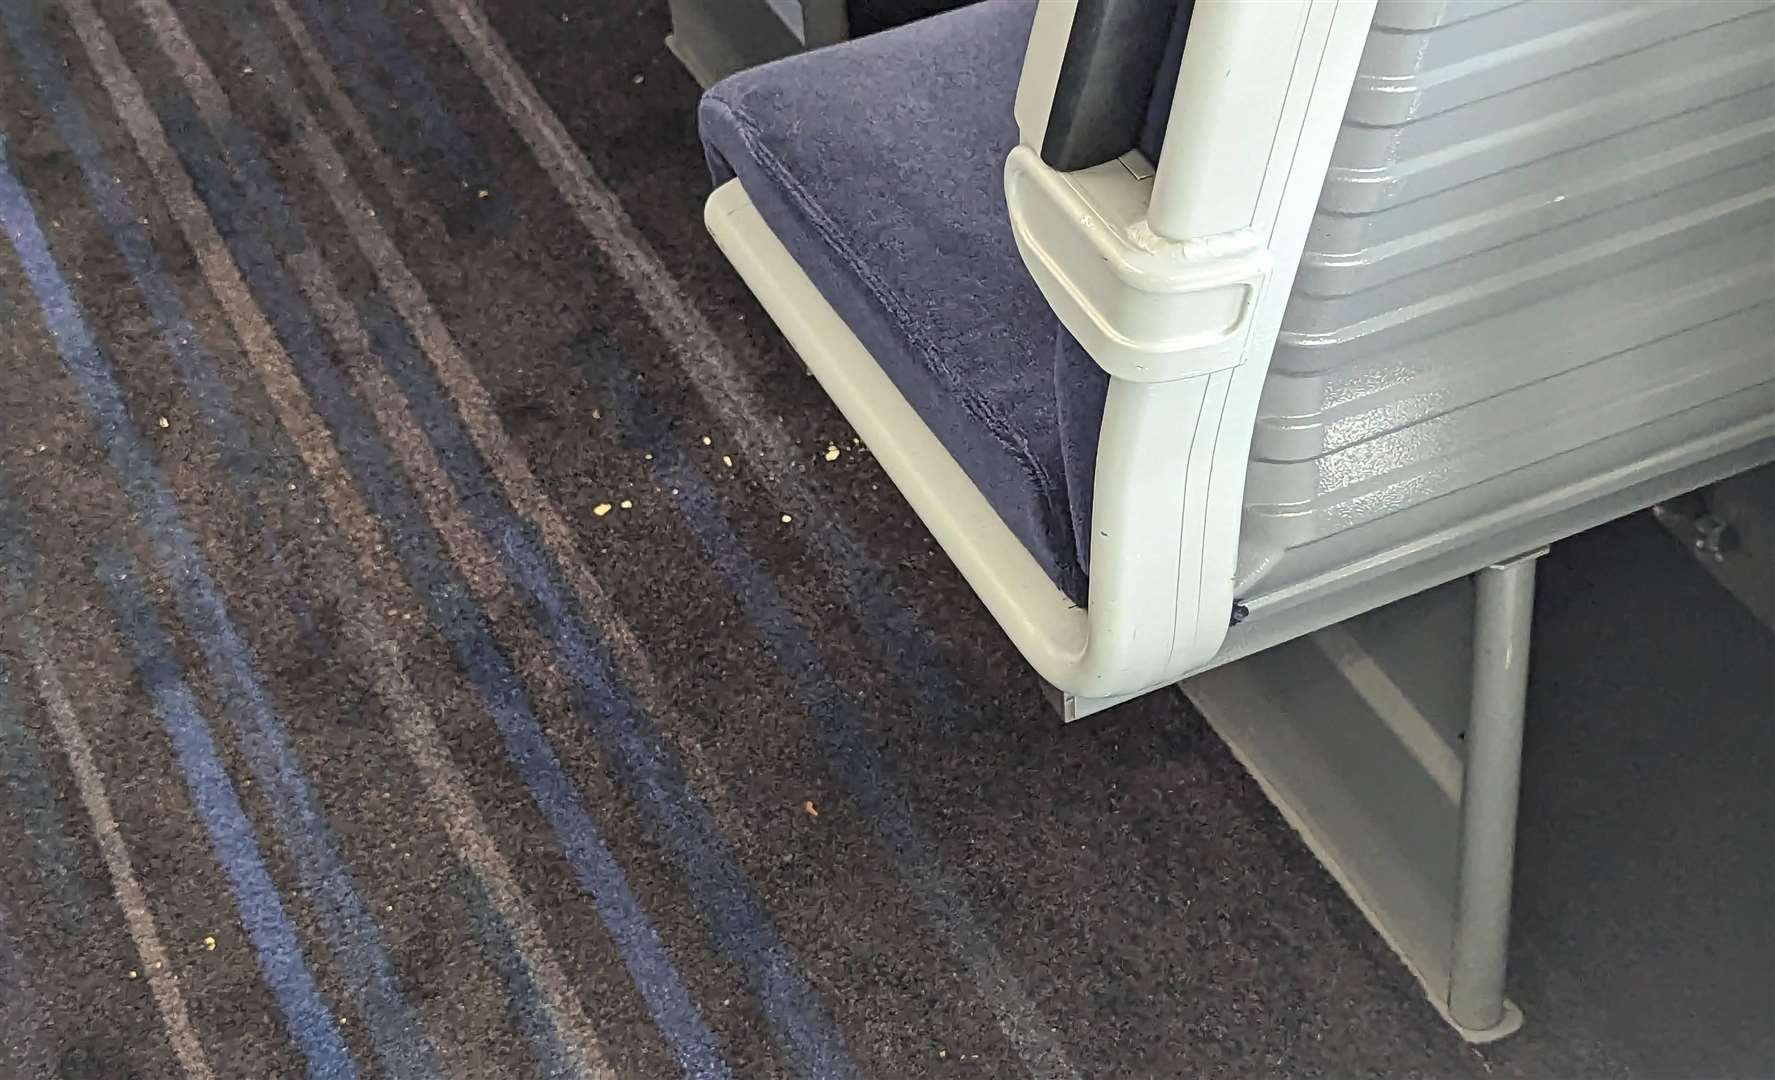 After a packed journey to St Pancras, crumbs were visible throughout the train